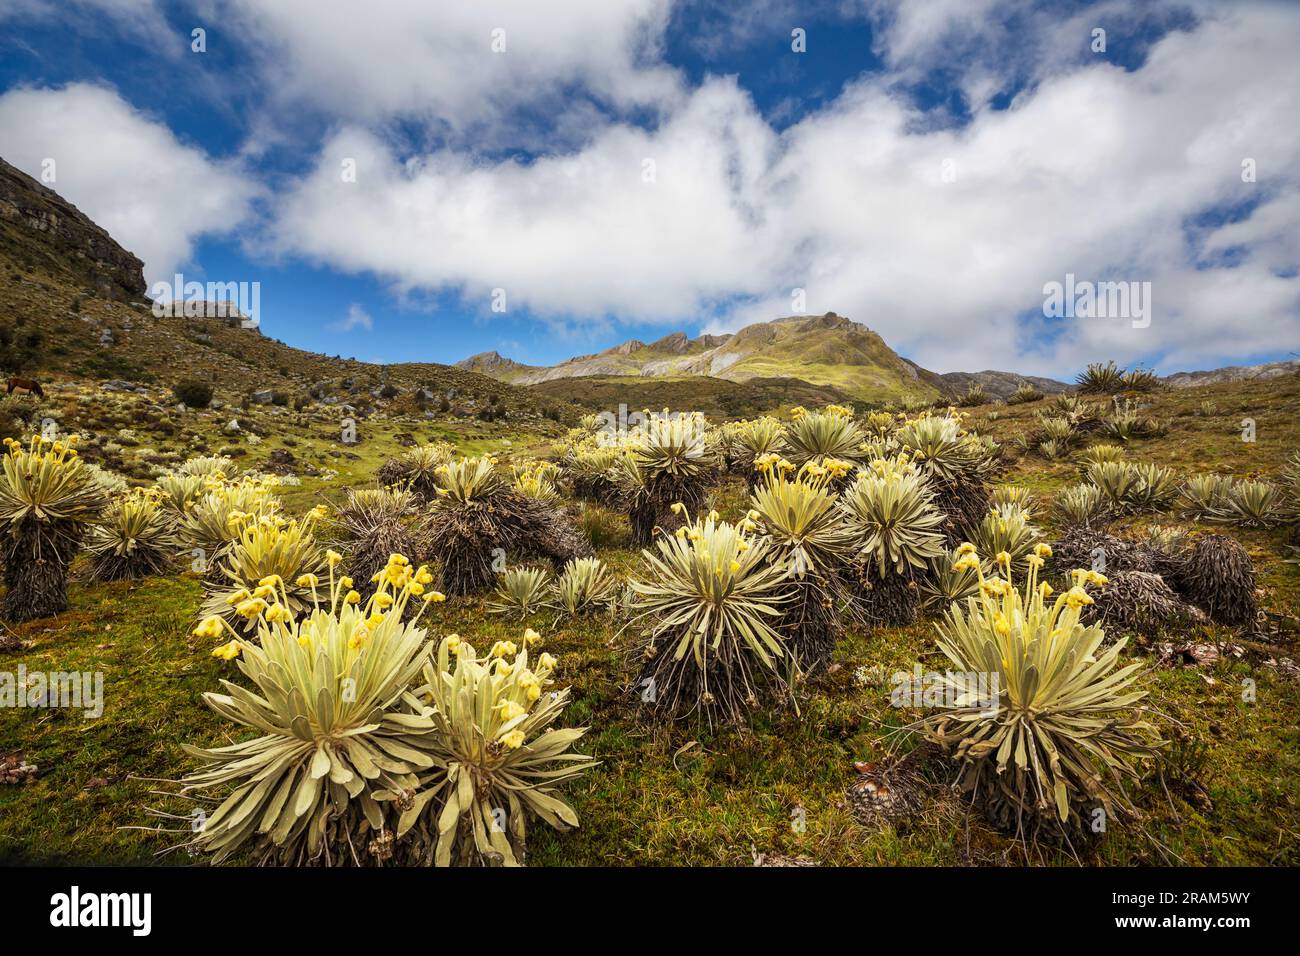 forest of frailejones or Espeletia, a beautiful plant in Colombian mountains, South America Stock Photo